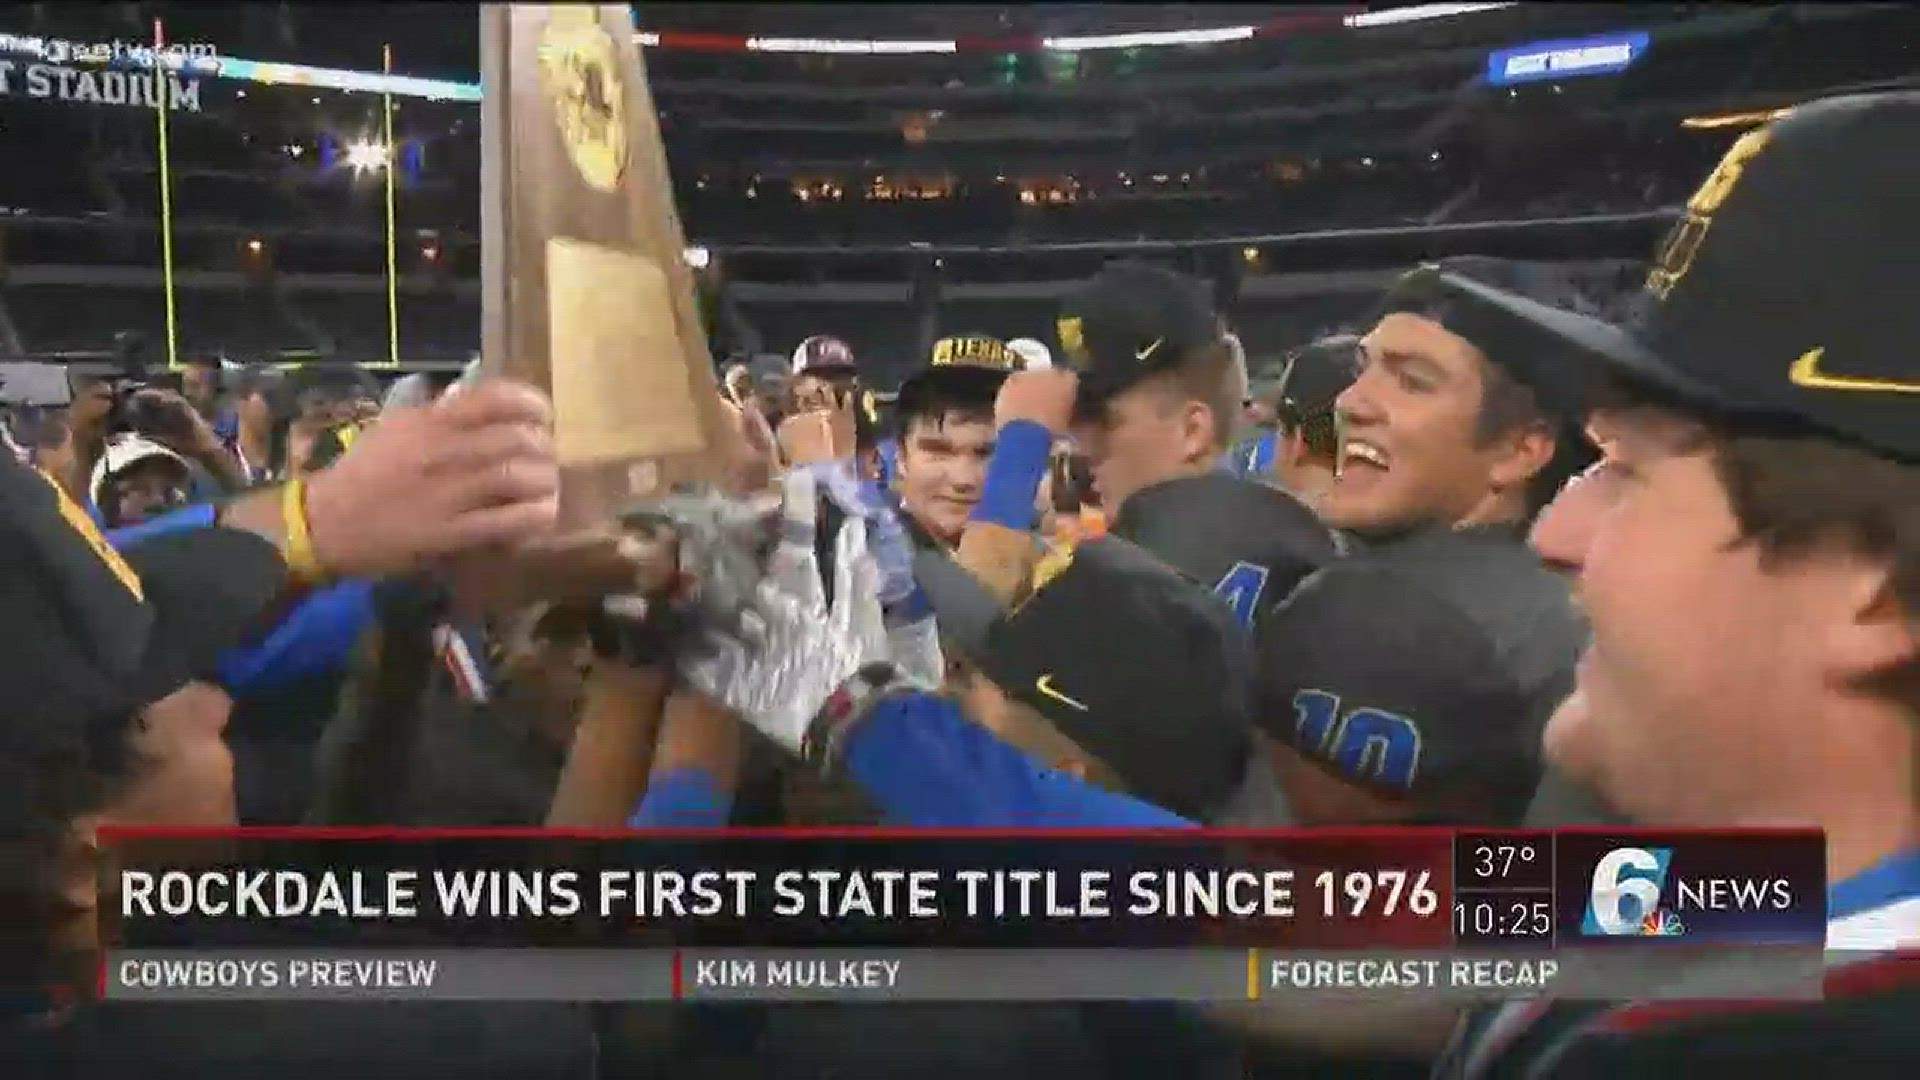 Rockdale wins its first state title since 1976.